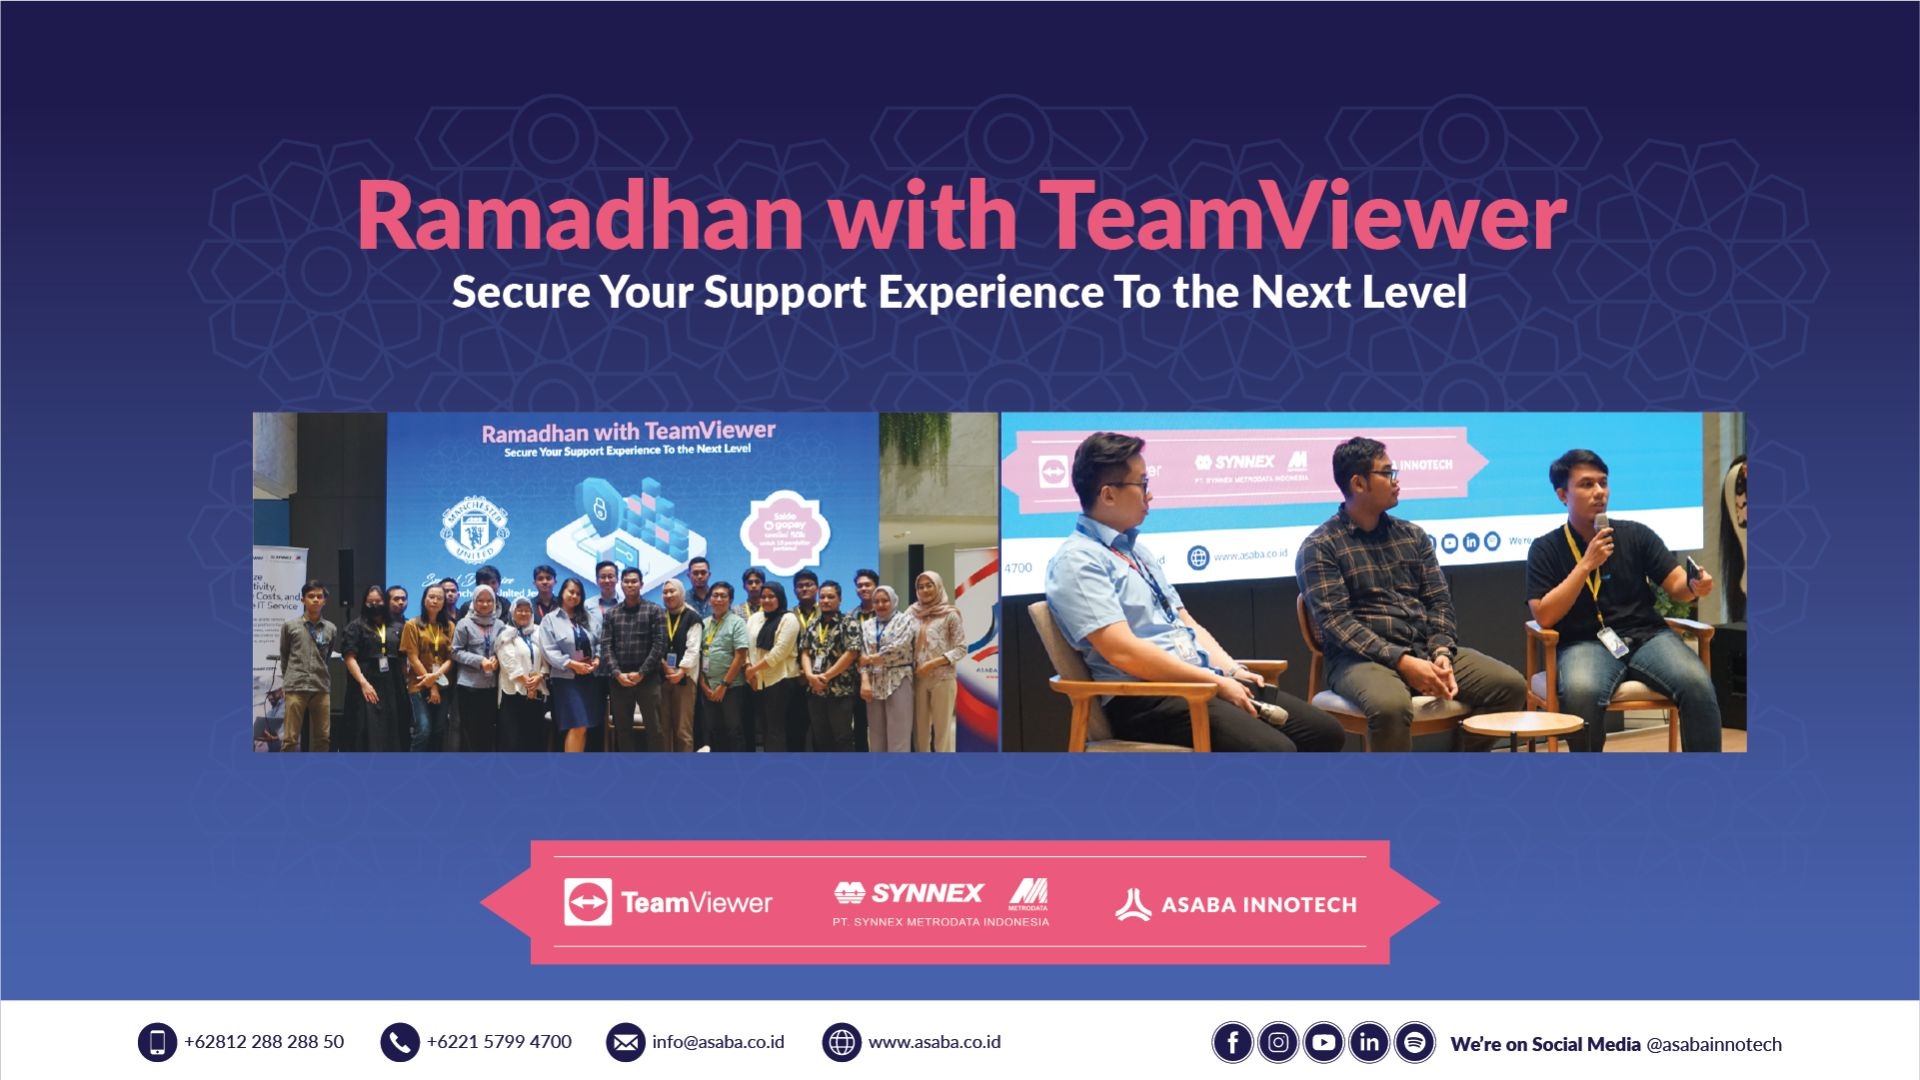 Ramadhan with TeamViewer – Secure Your Support Experience To The Next Level